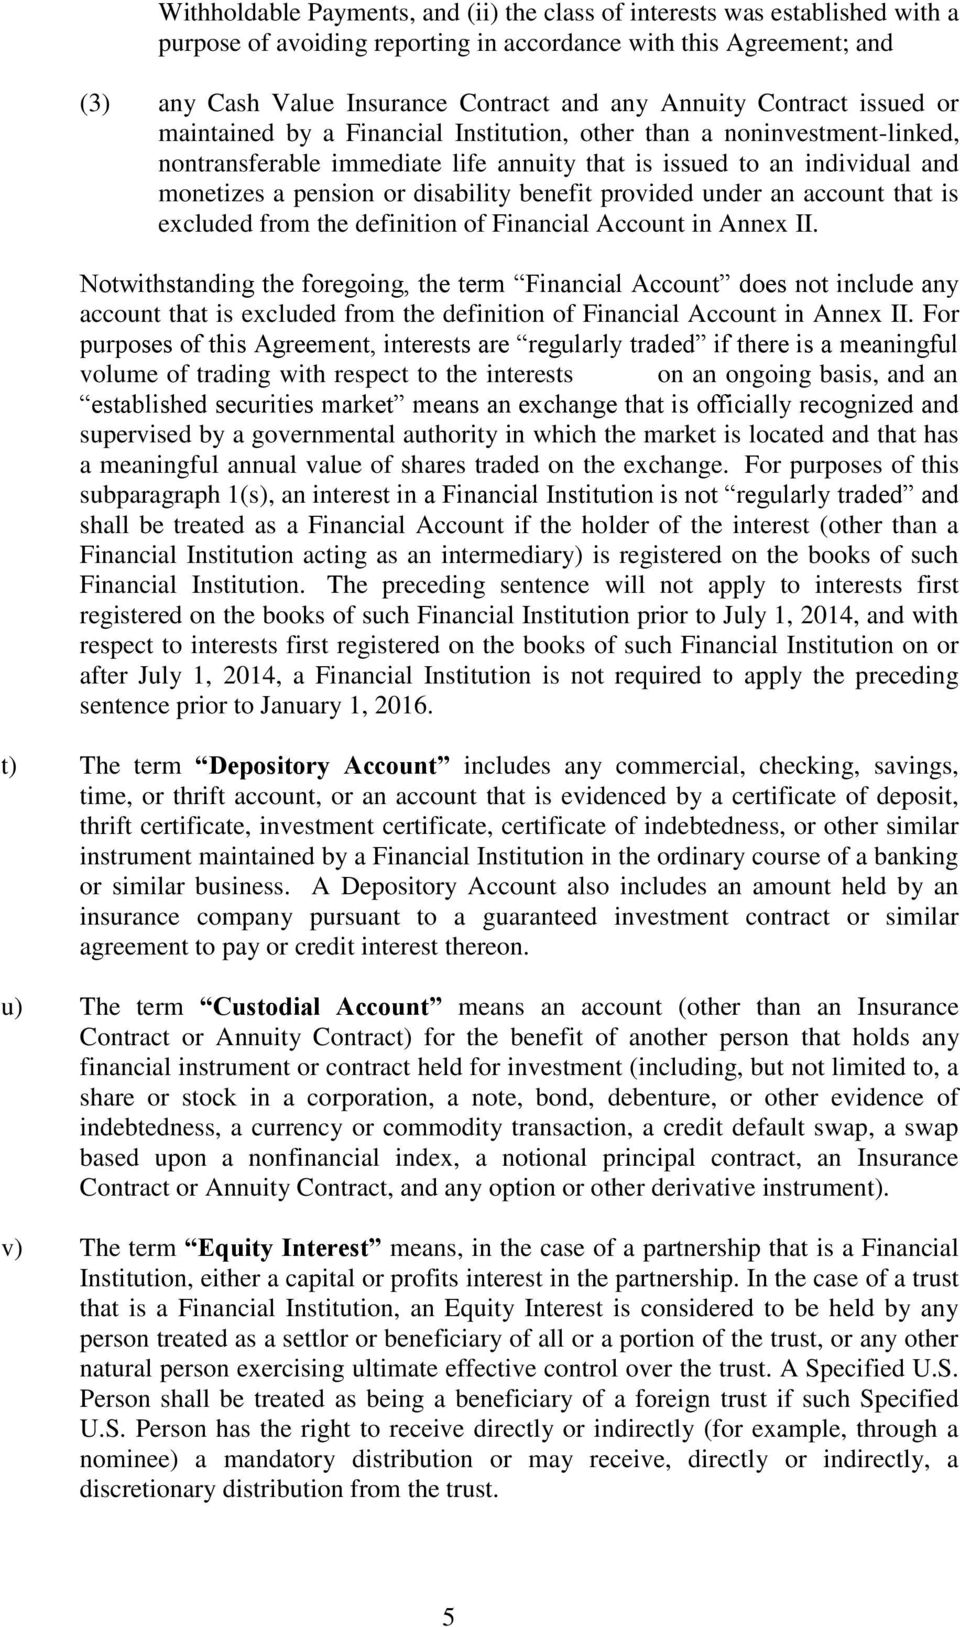 disability benefit provided under an account that is excluded from the definition of Financial Account in Annex II.